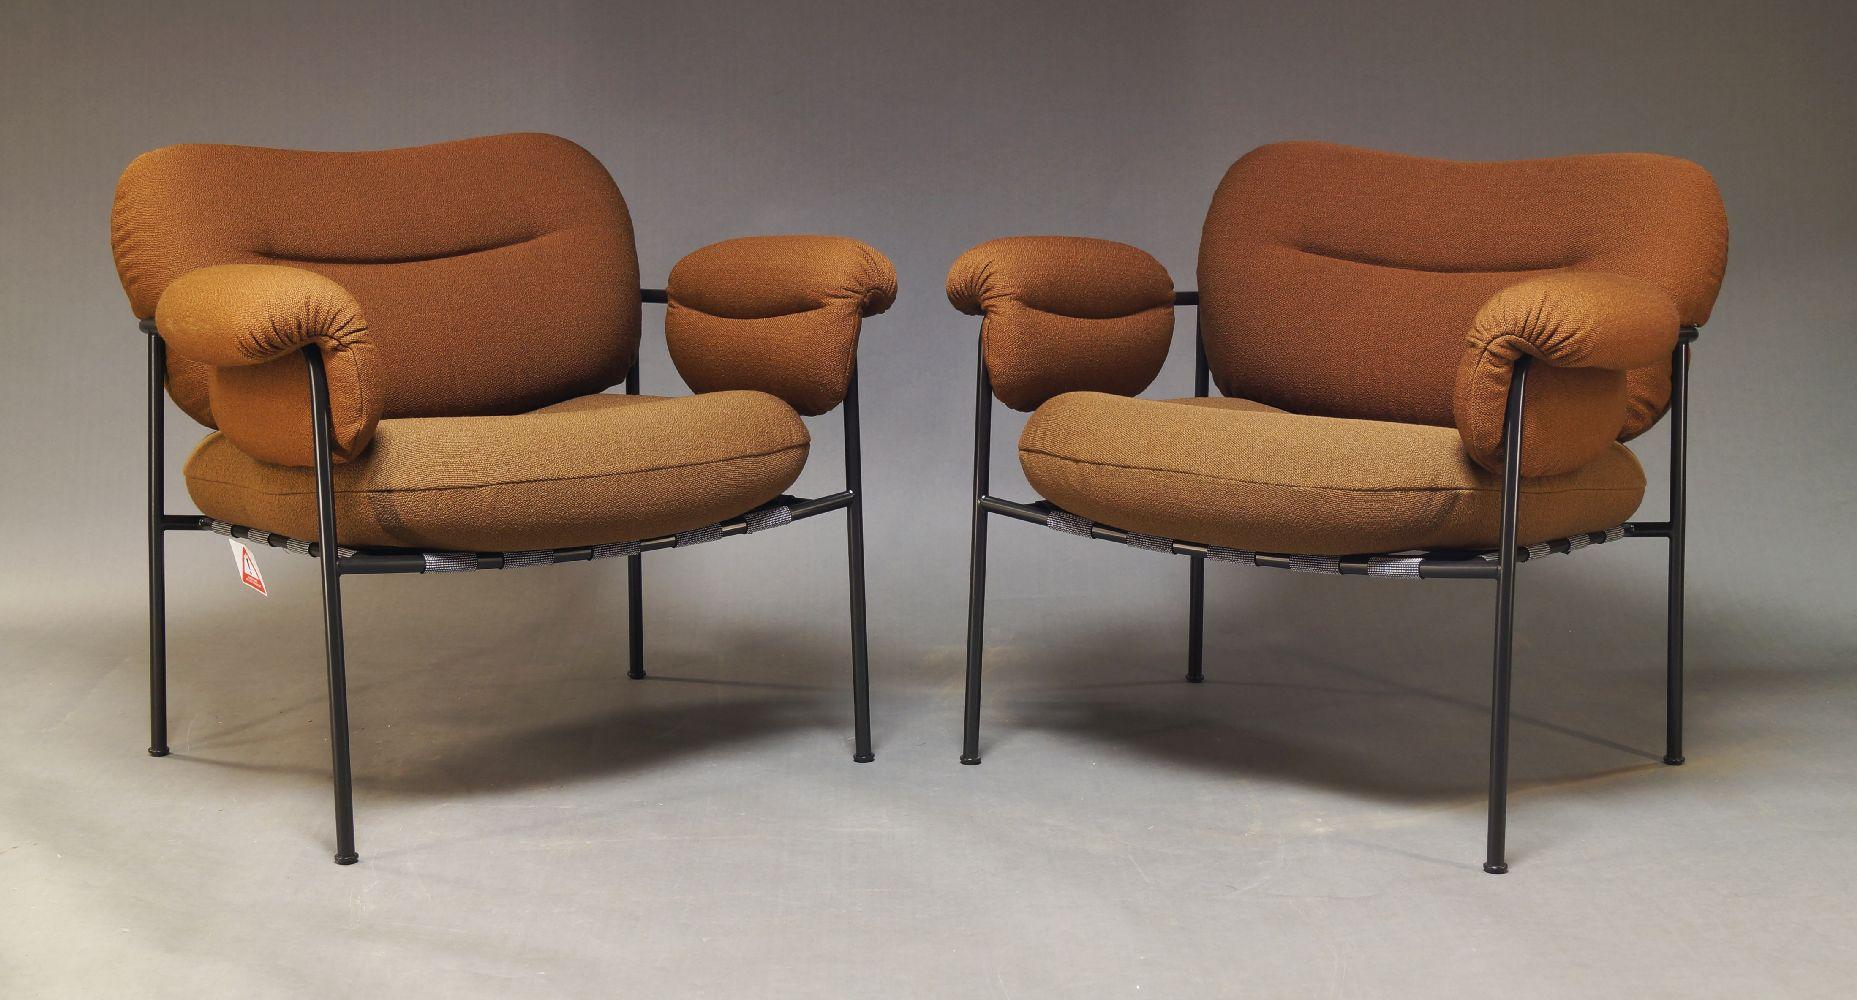 Bollo armchairs by Fogia pair designed by Andreas Engesvik, Sweden.

Stunning pair of Swedish design Fogia 'Bollo' armchairs designed in collaboration with Andreas Engesvik circa 2020, the chairs with brown fabric upholstered seat and armrests on